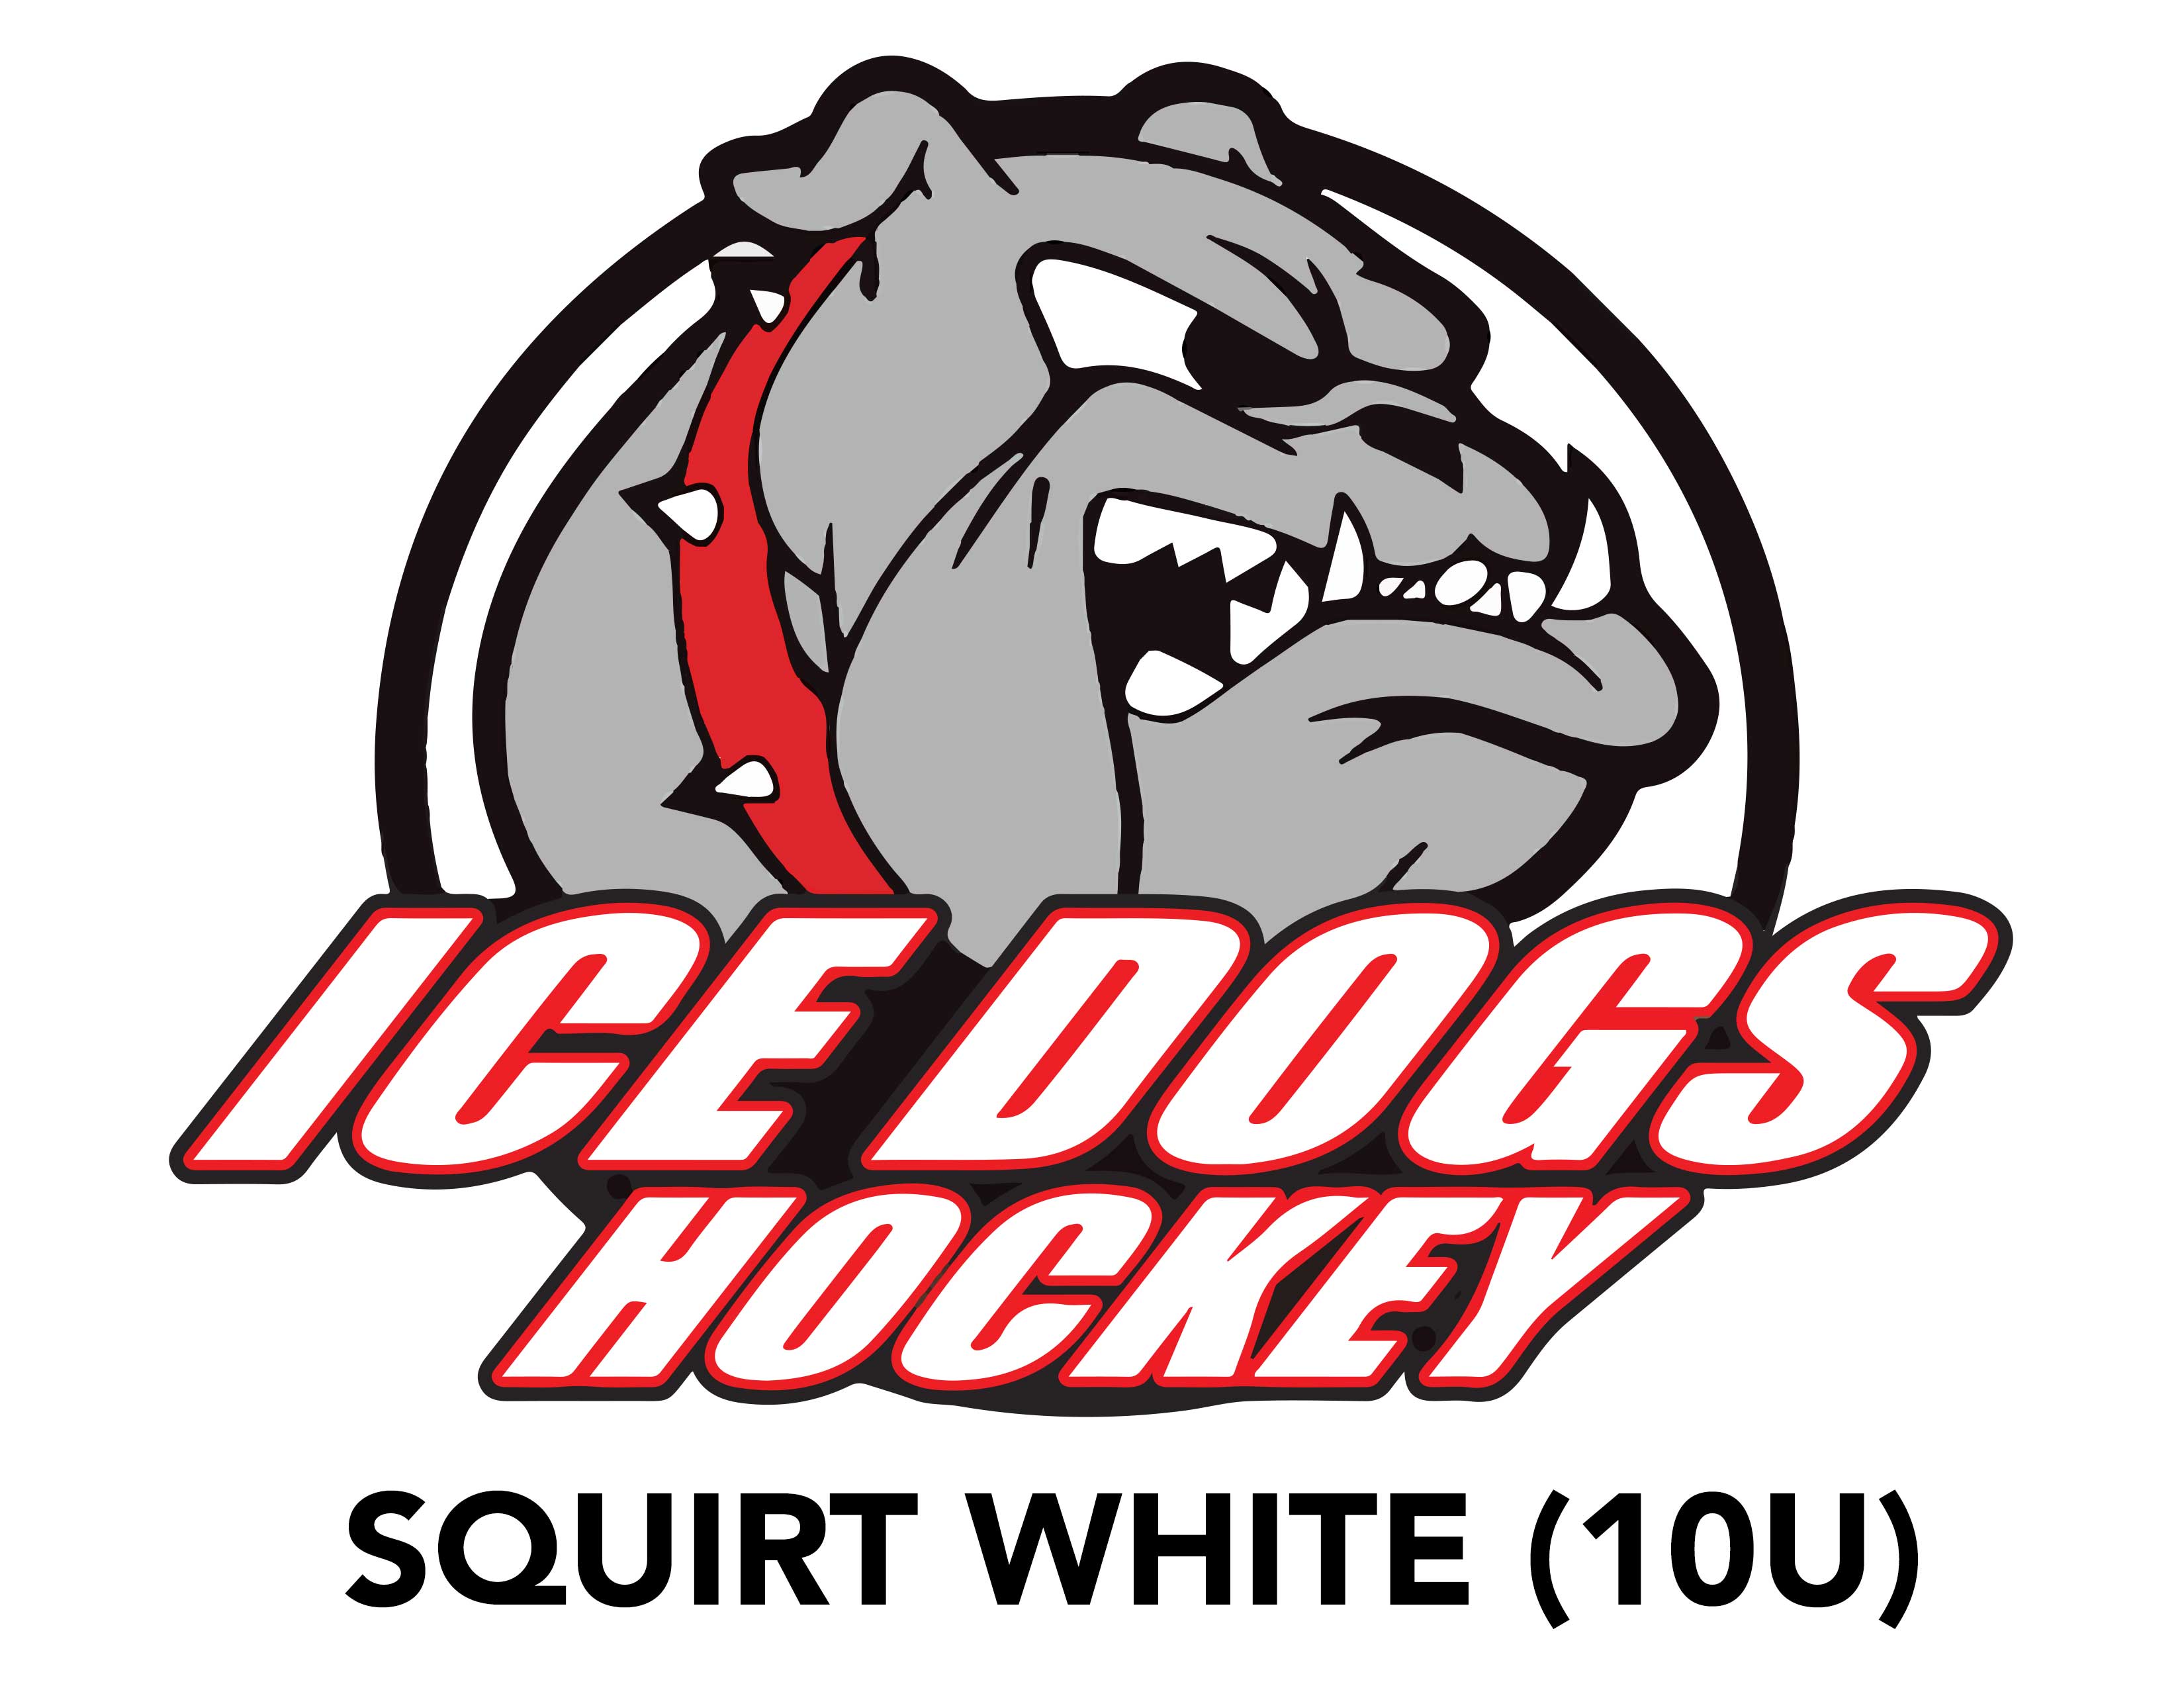 Ice Dogs Logo - WEST MICHIGAN ICE DOGS SQUIRT WHITE (10U)